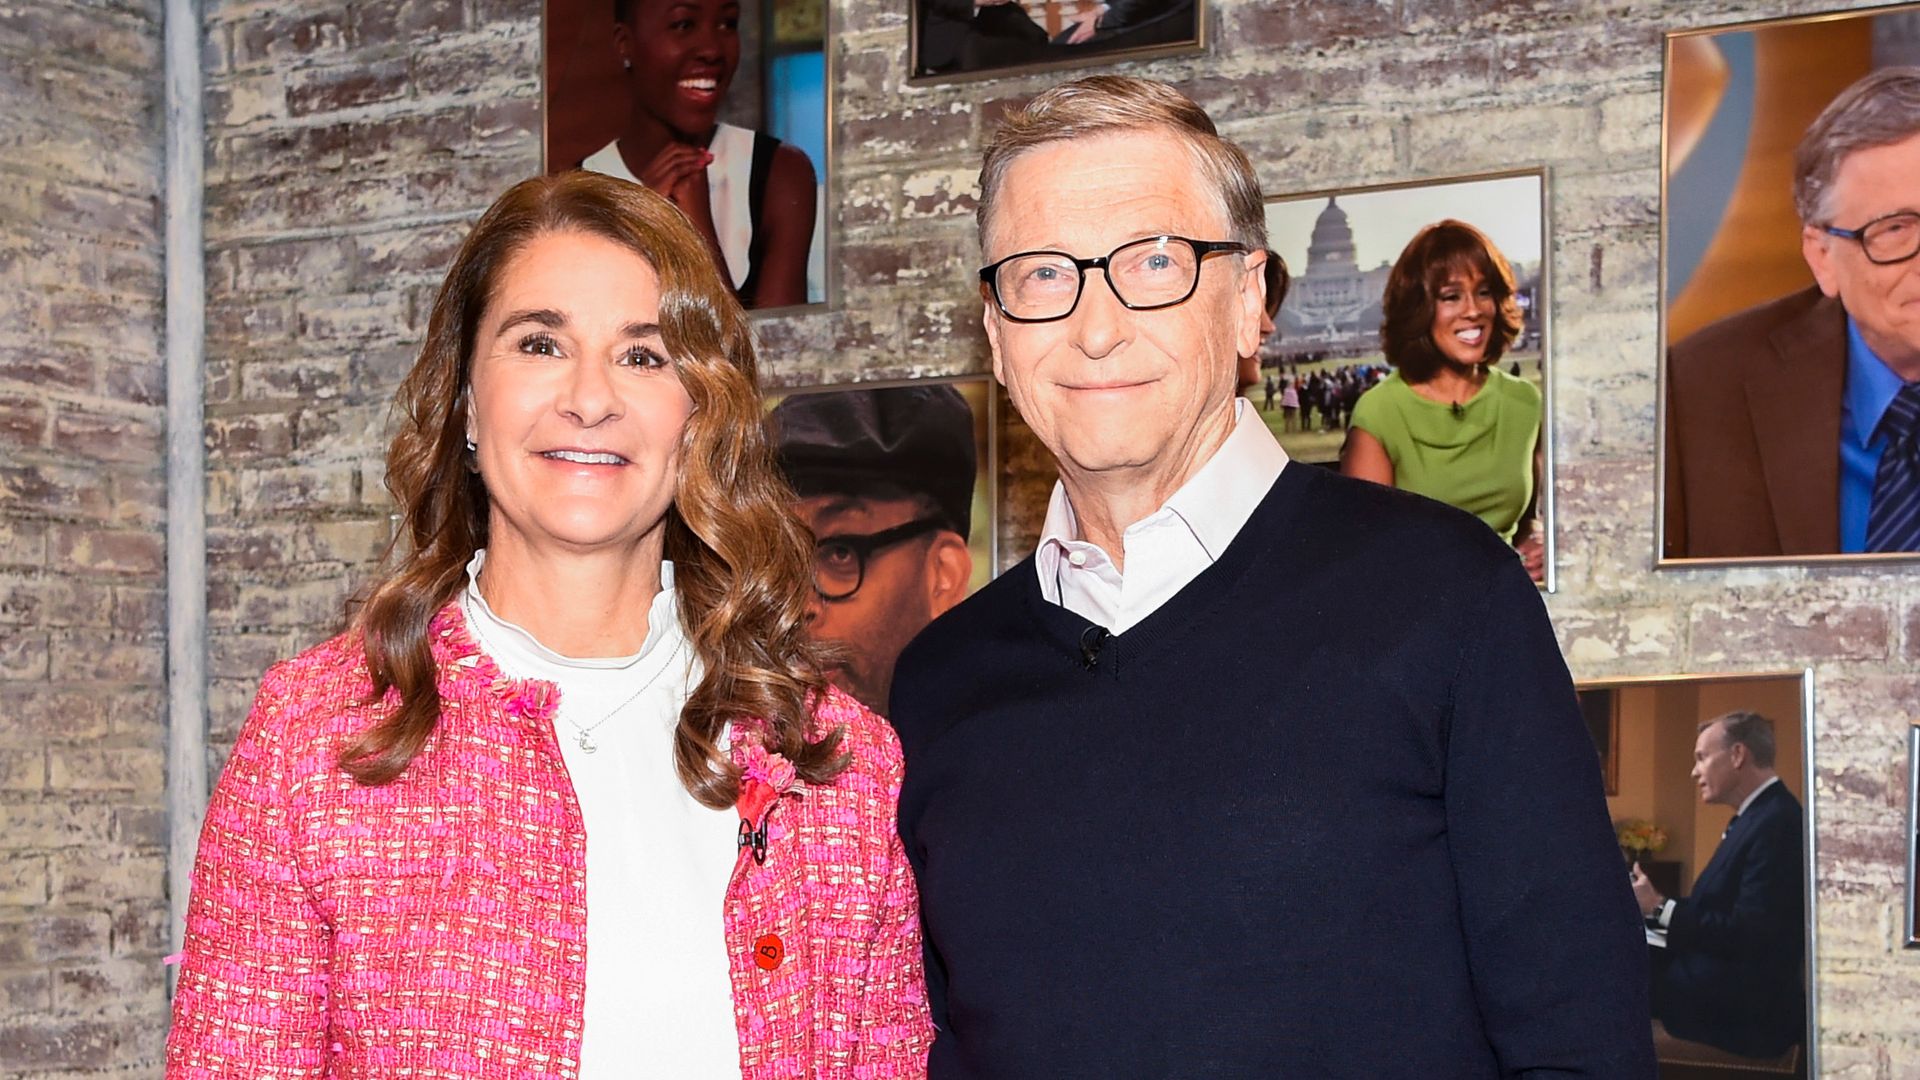 Melinda French to resign from foundation started with ex-husband Bill Gates with $12.5 billion exit deal